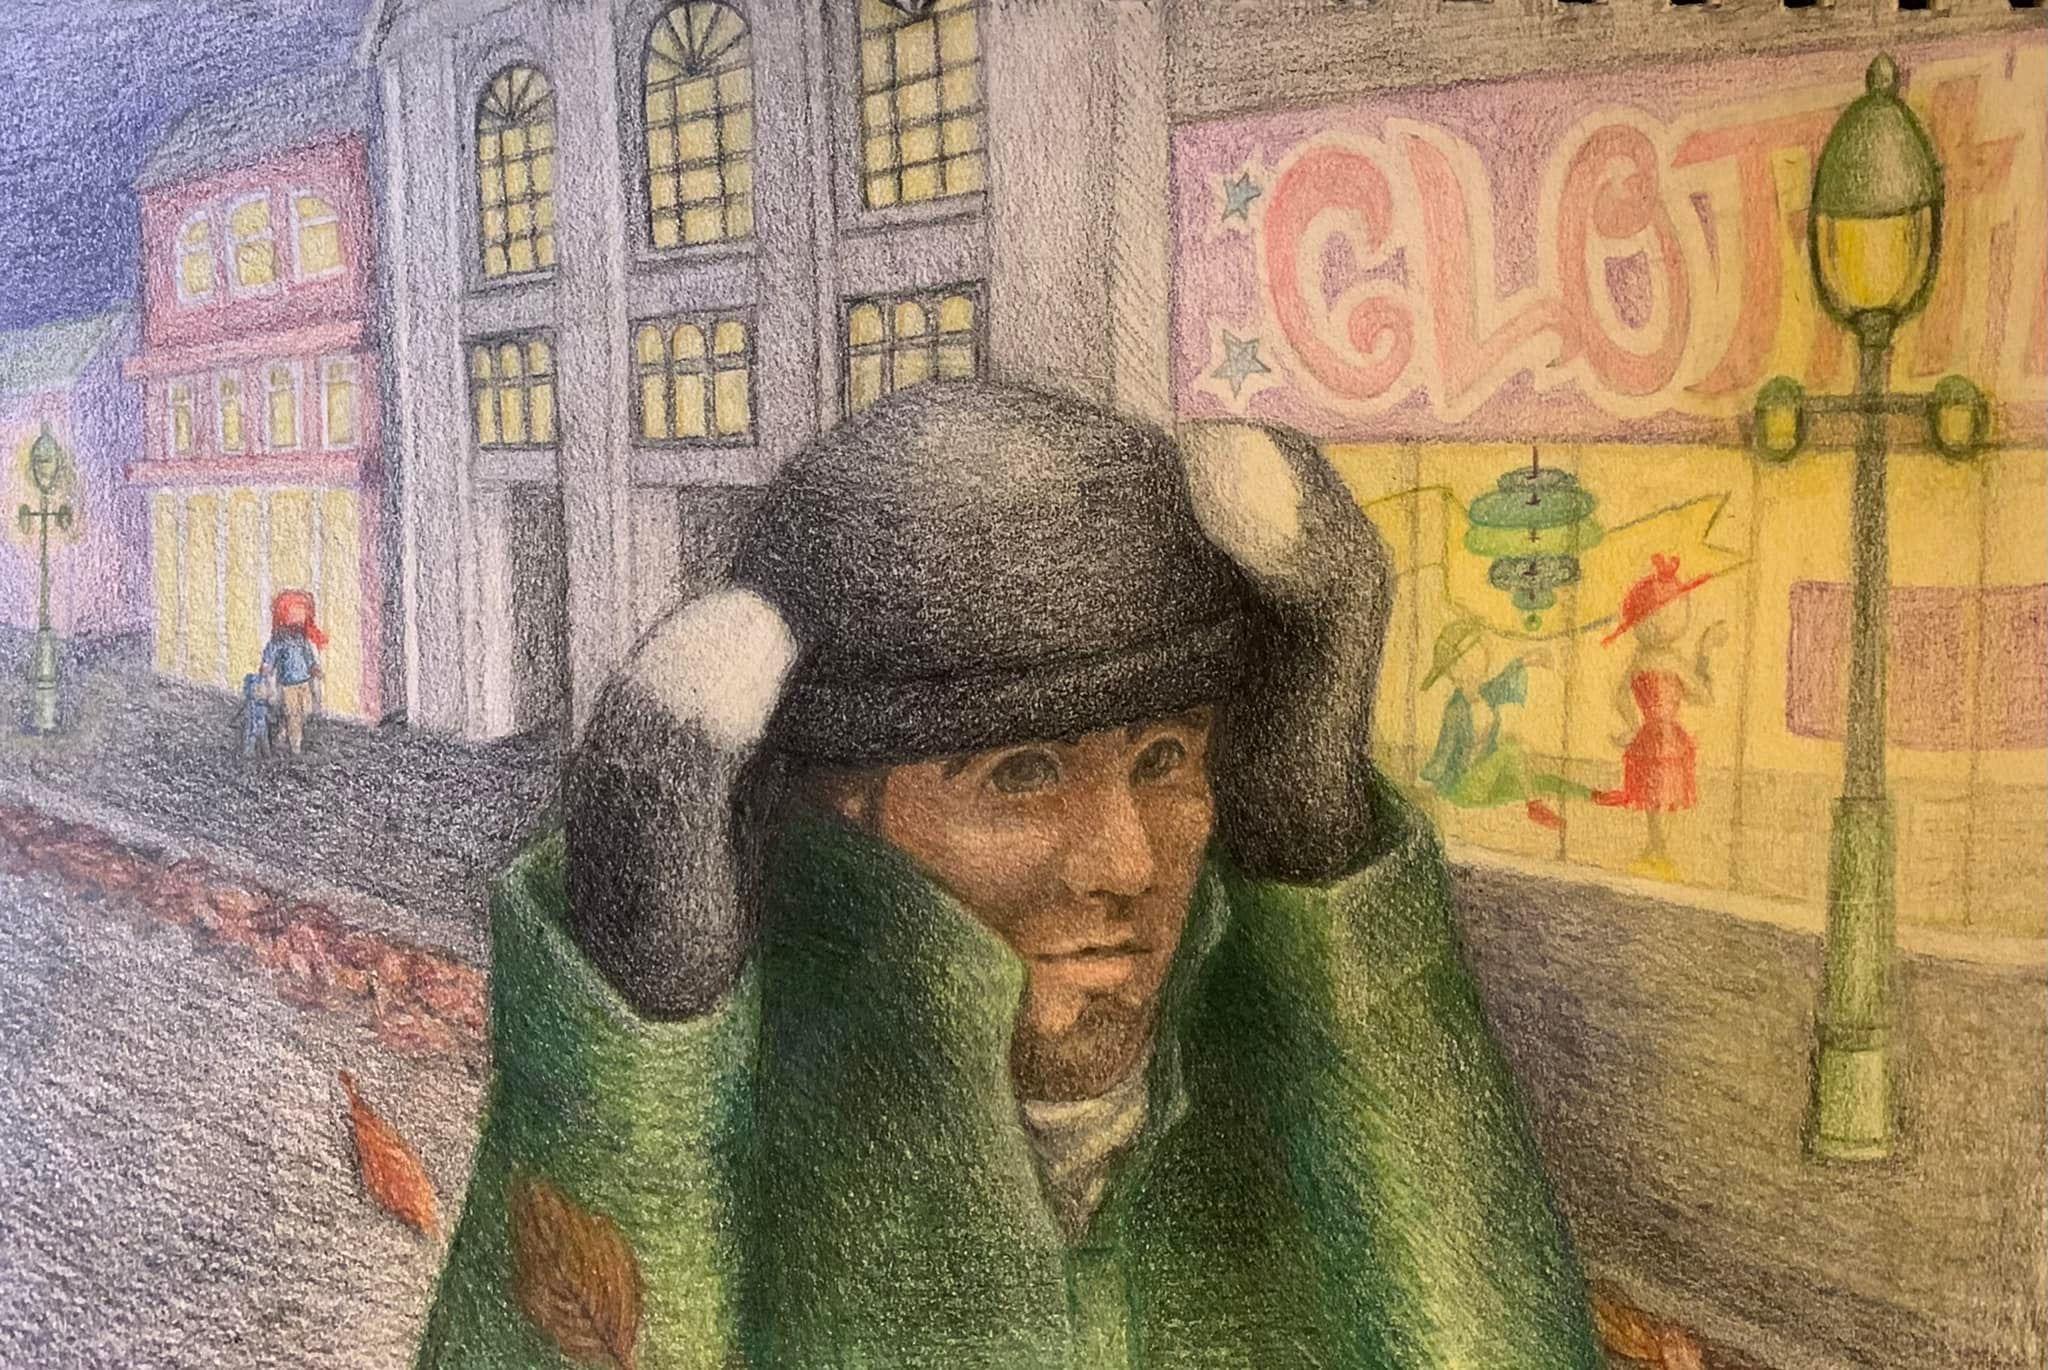 picture book illustration of a city block in the evening, a cold wind blows brown leaves, windows glow, a man in a green jacket pulls his hat down with gloved hands